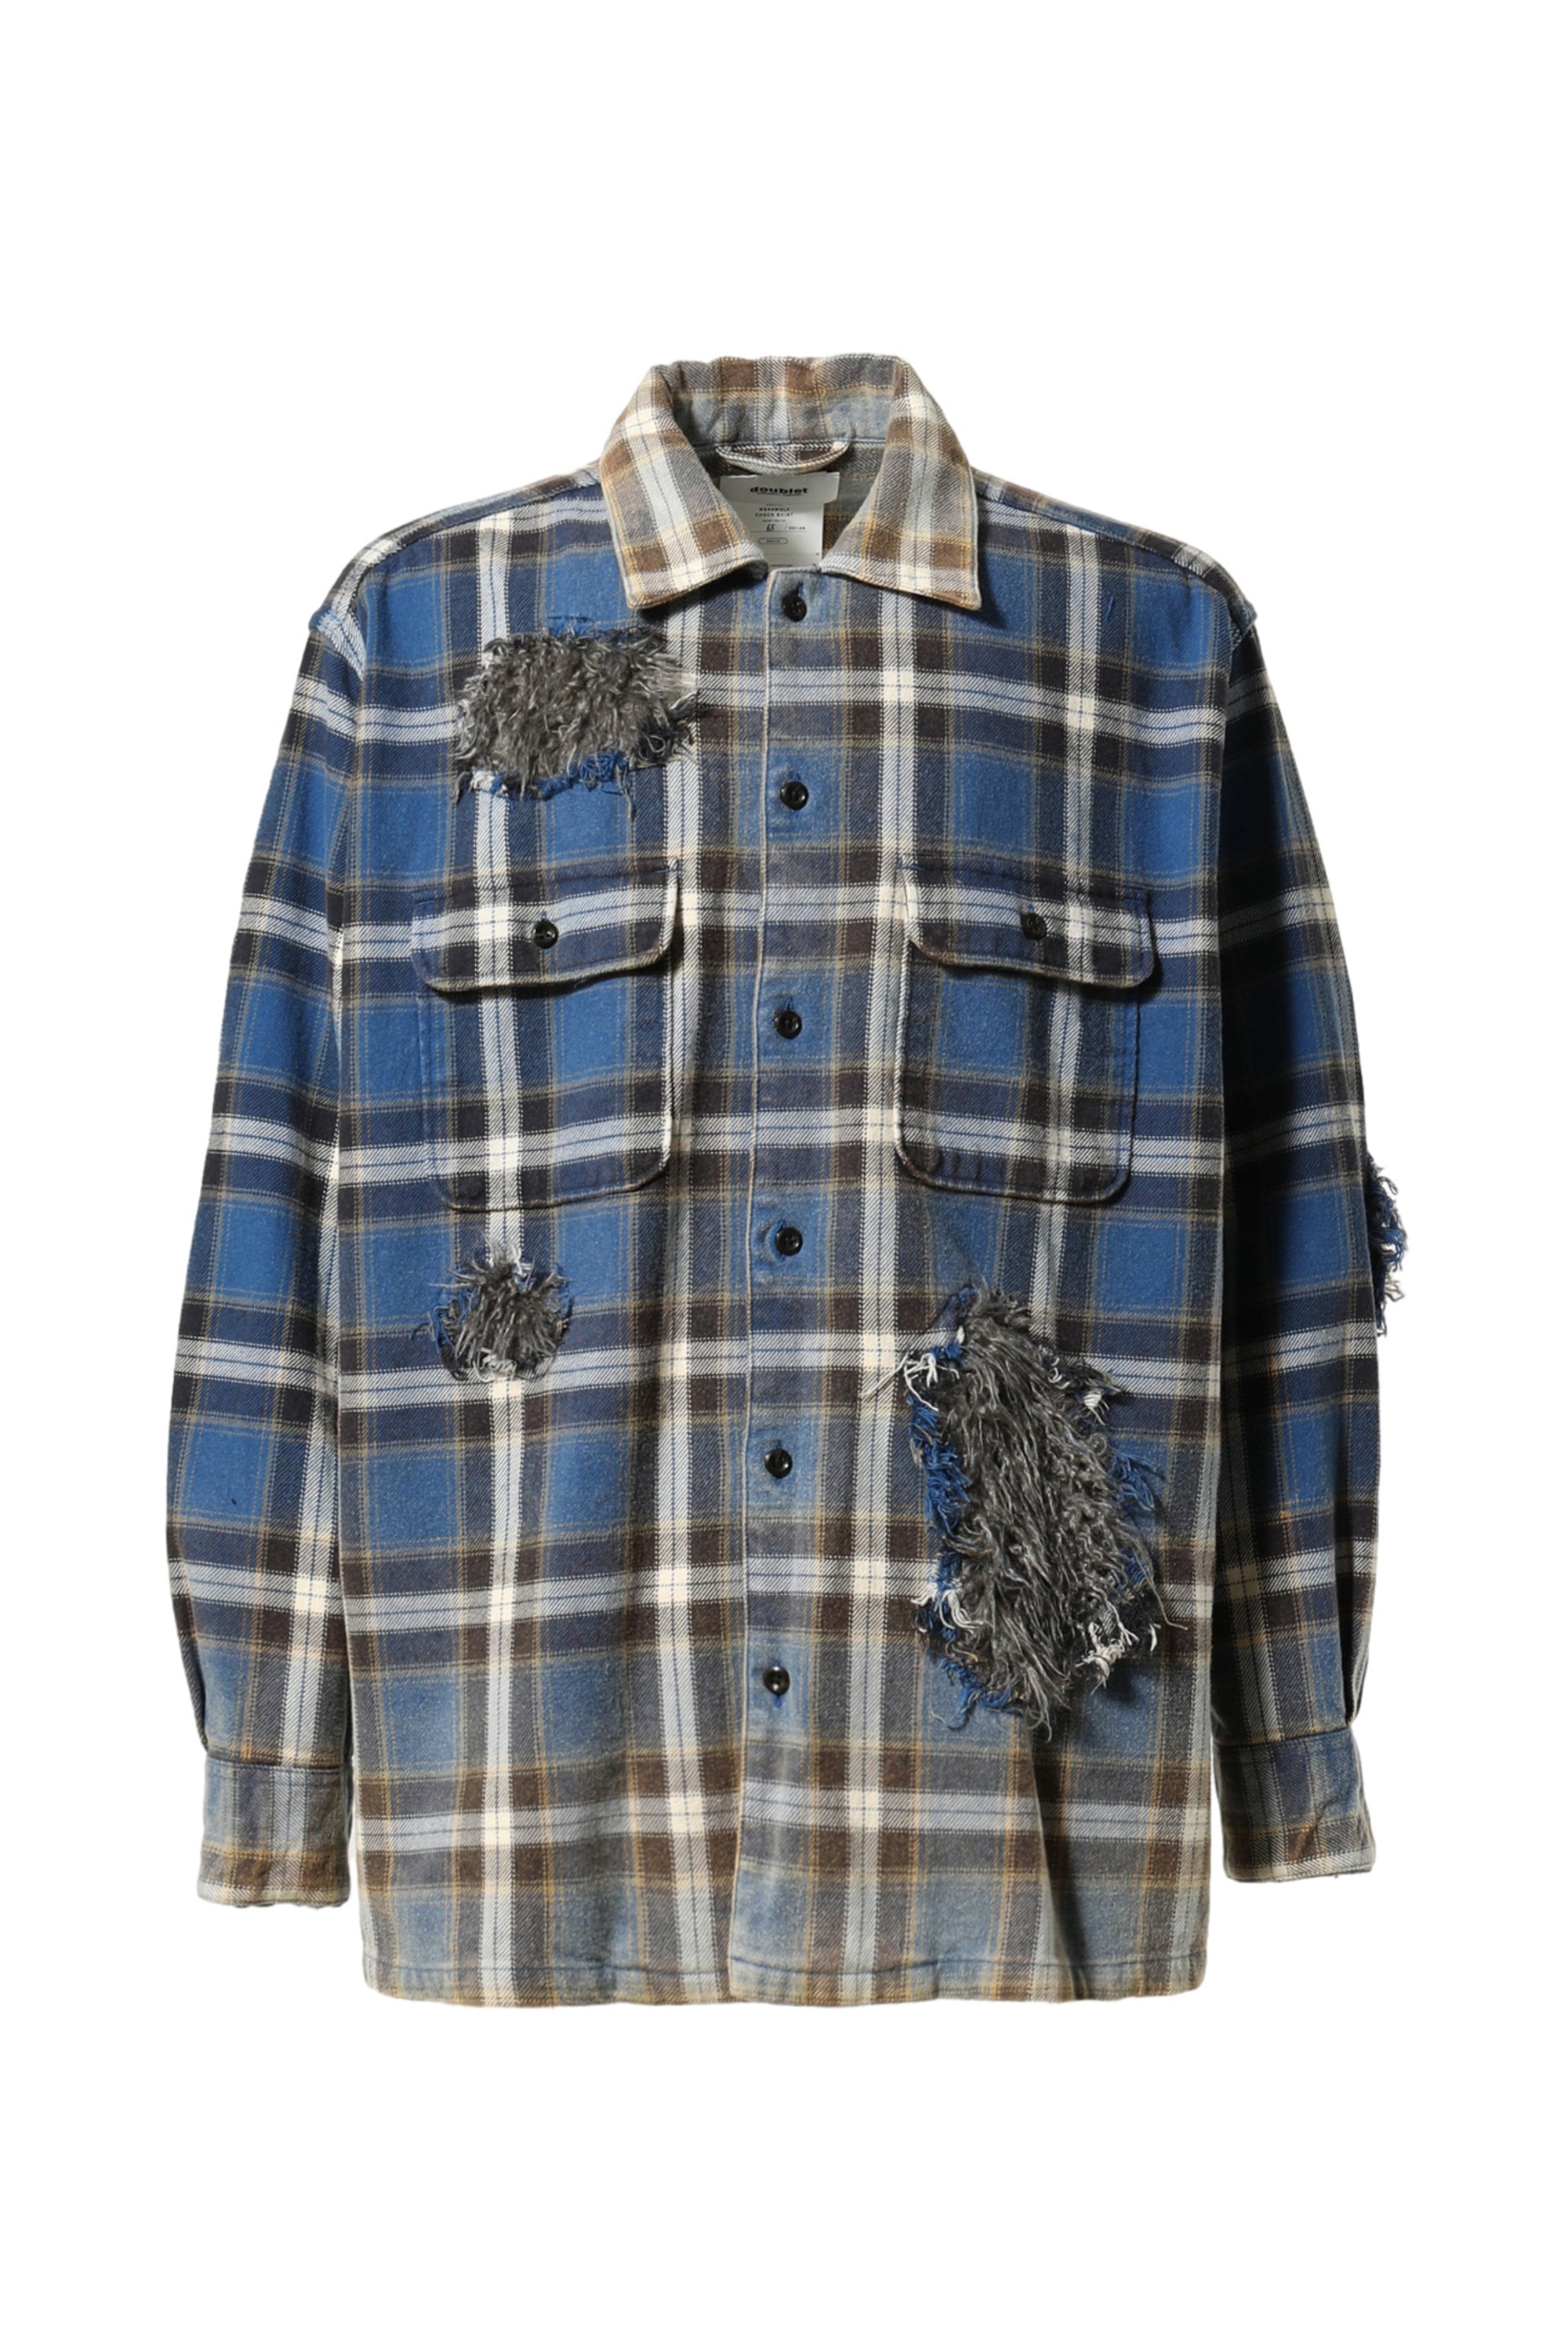 MLVINCE QUILTED CHECK SHIRTS JACKET